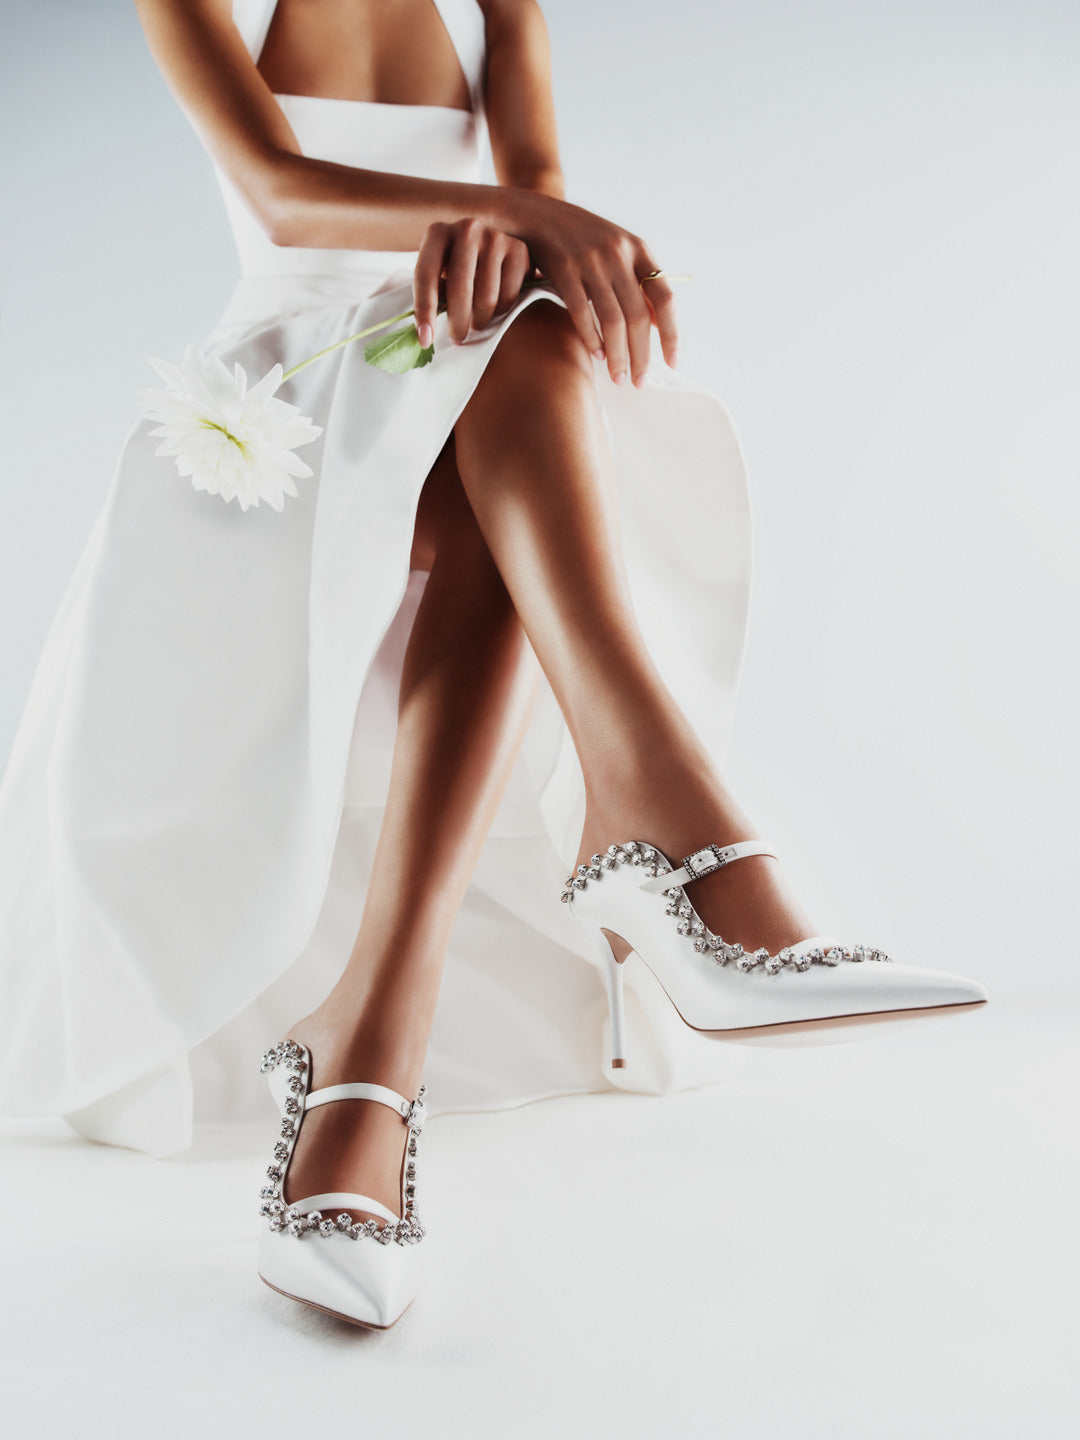 Why Miss Universe 2023 Contestants Wear Shoes With Dramatic Heels